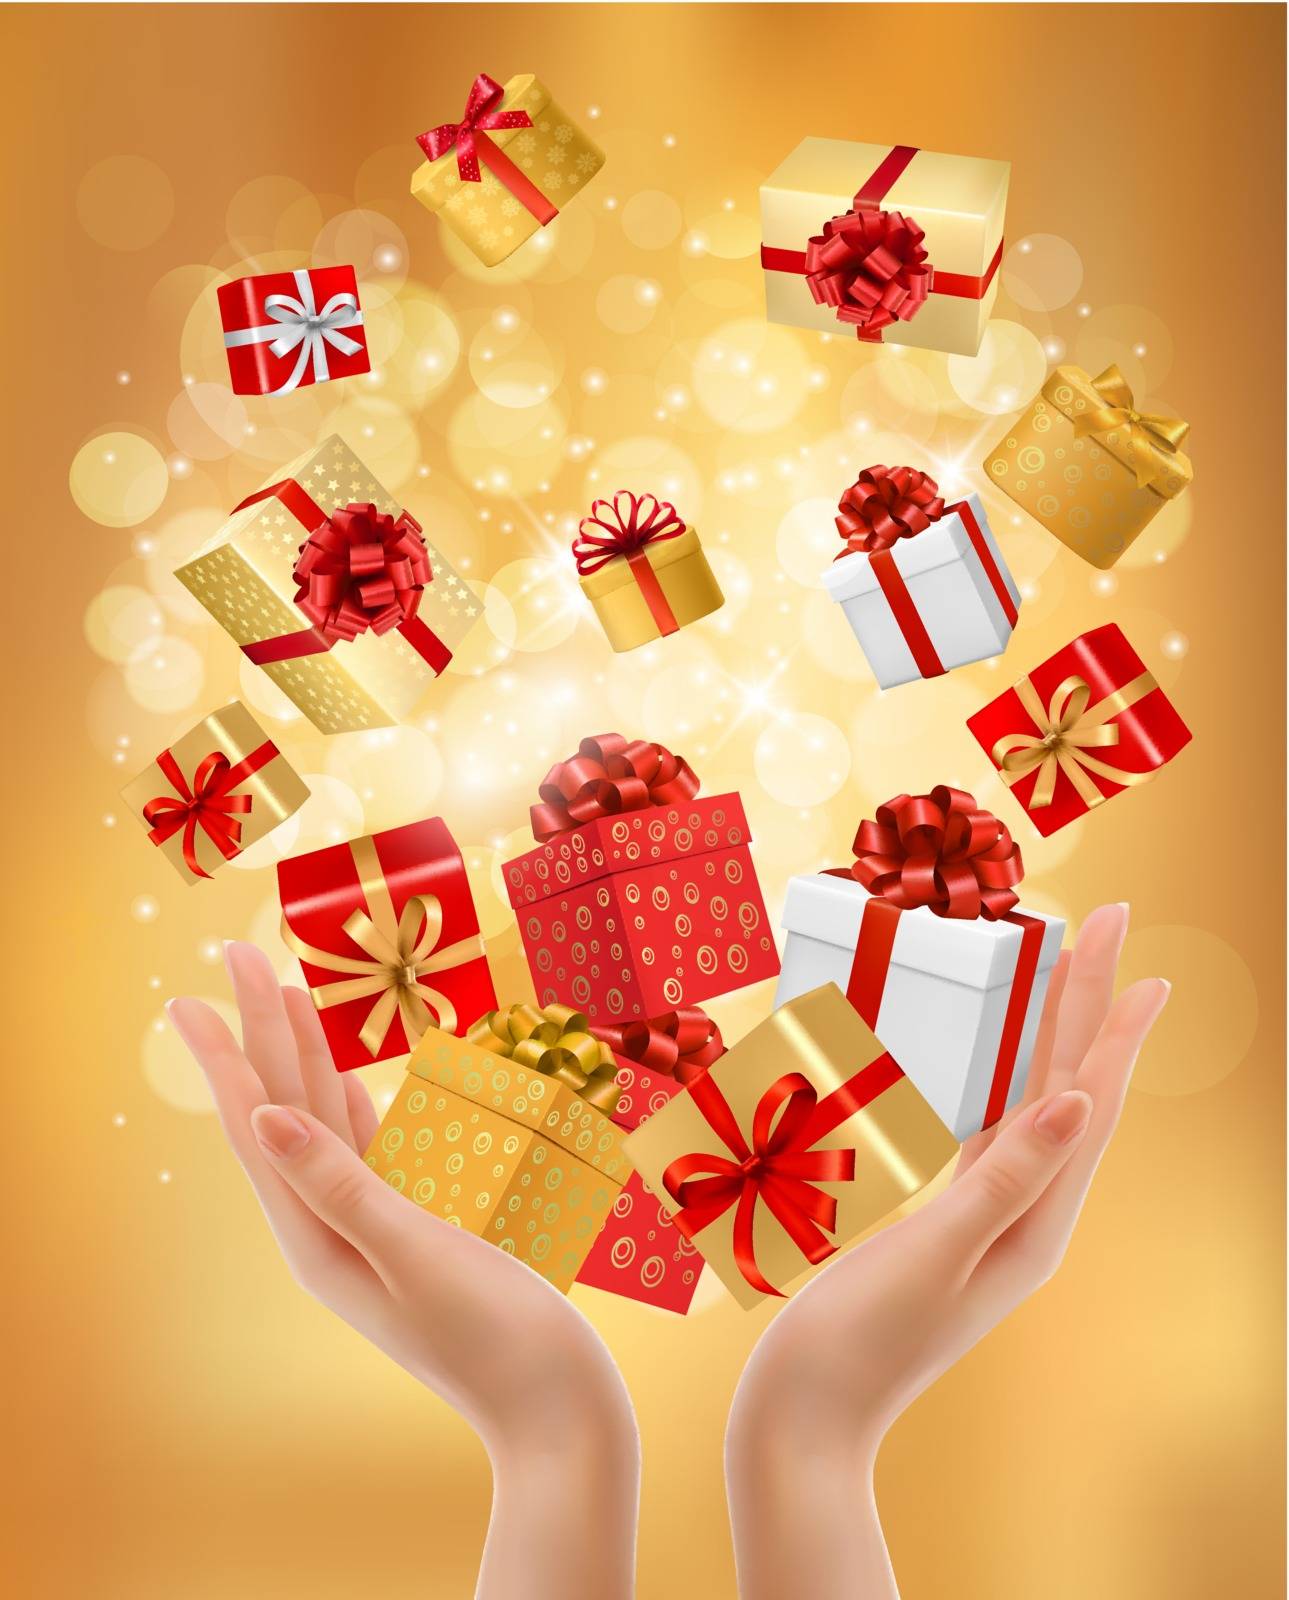 Holiday background with hands holding gift boxes. Concept of giving presents. Vector illustration. 